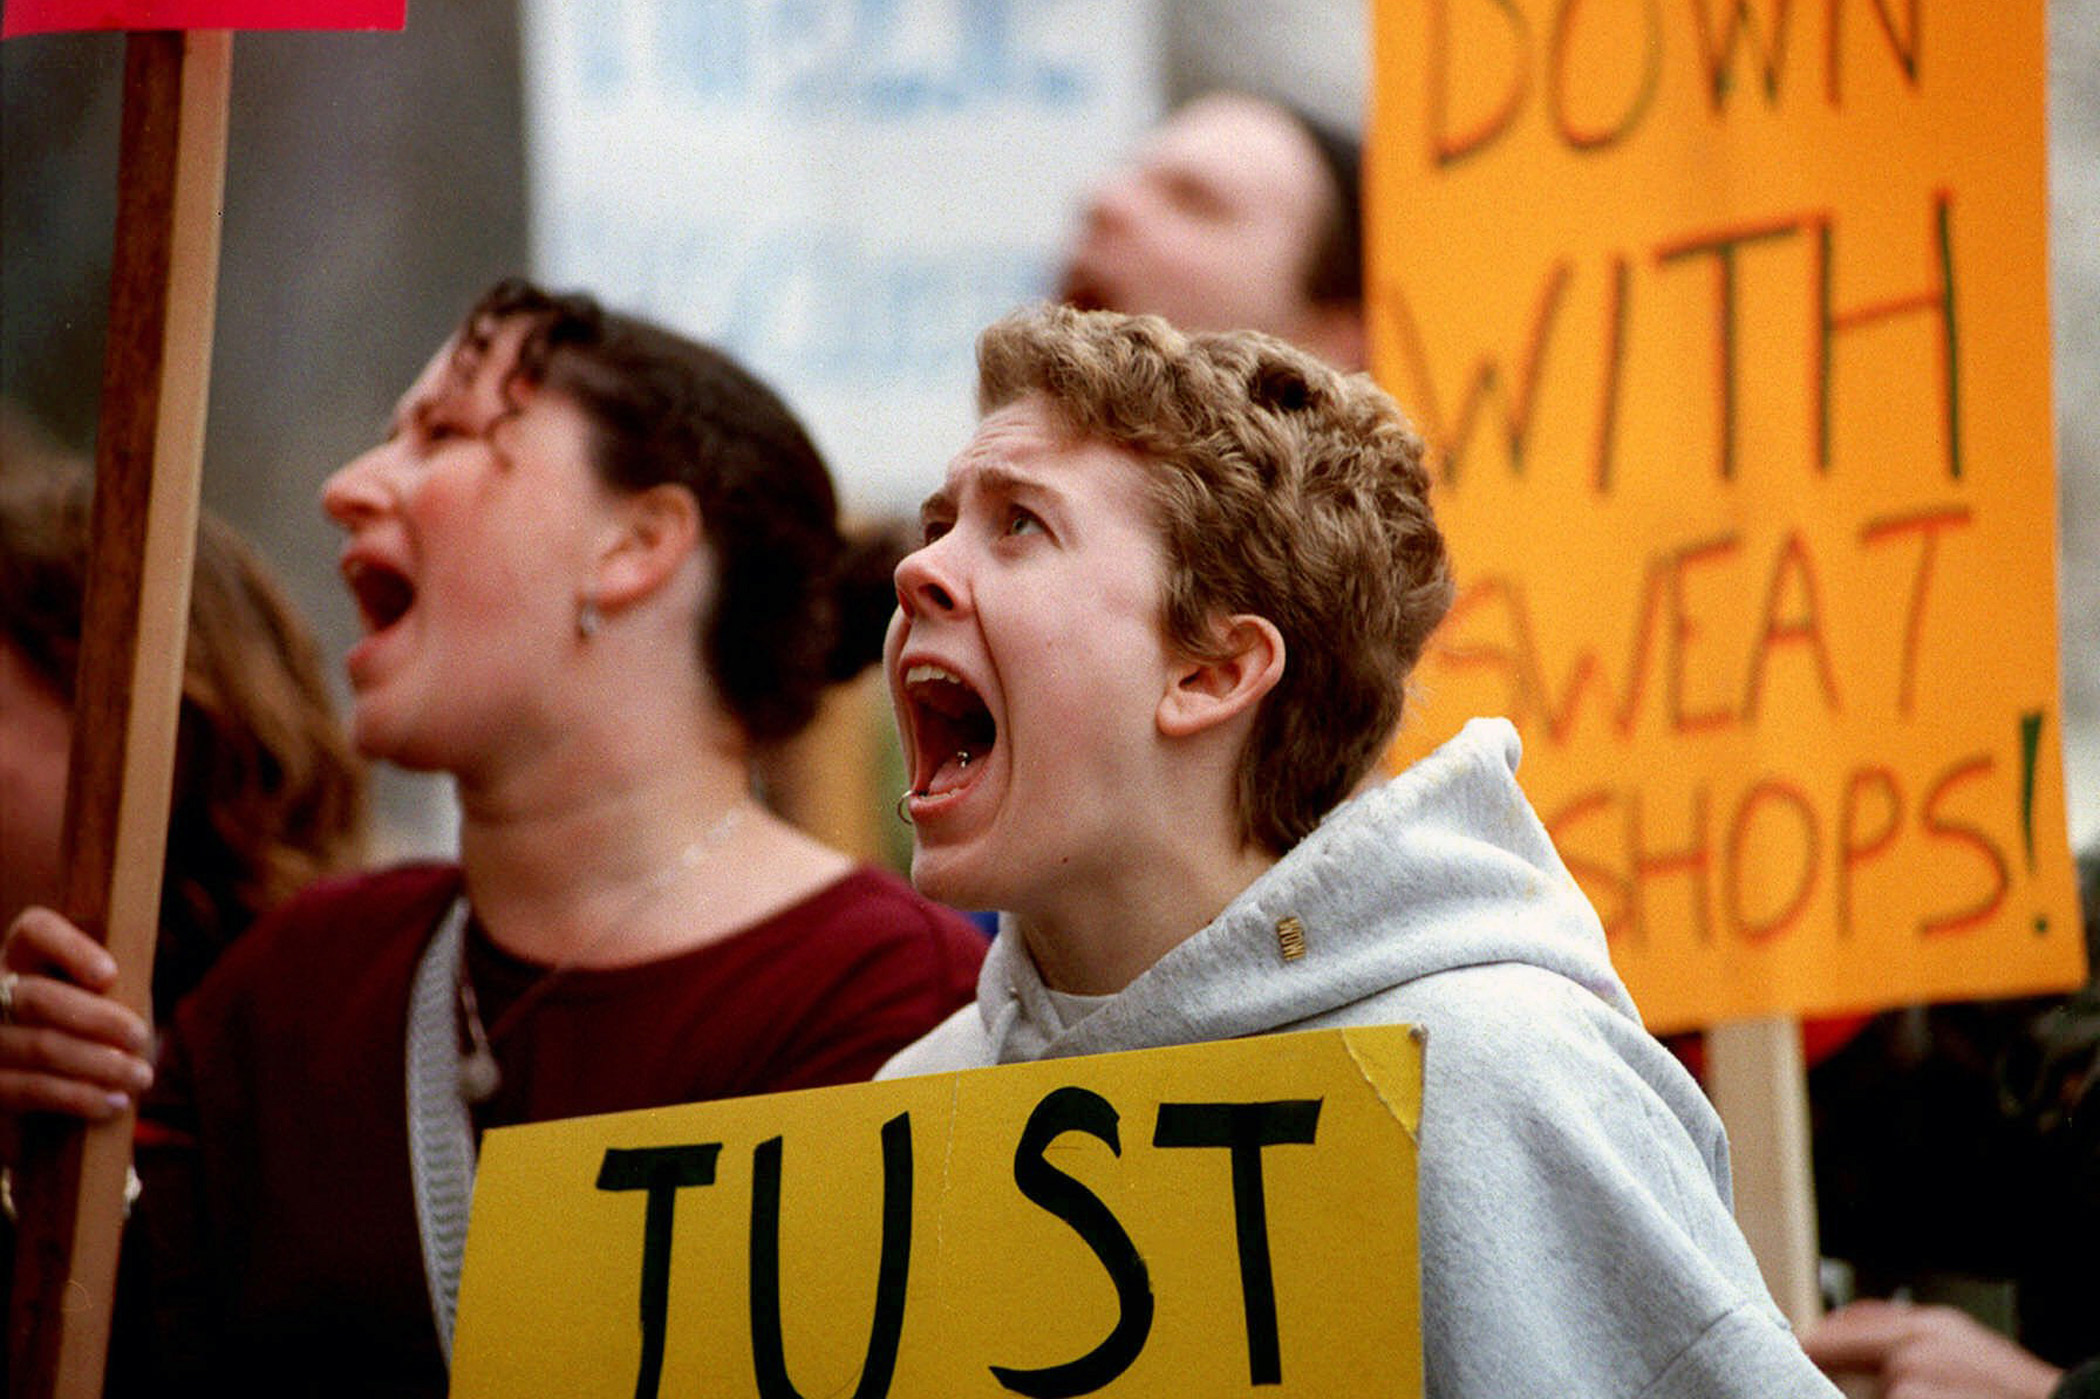 Kerstin Cornell yells outside the office of University of Michigan President Lee Bollinger during a sit-in on March 17, 1999. Students began the sit-in to protest sweatshop conditions in factories that make licensed apparel for the school, which was the nation's leading university in the sales of licensed apparel and other goods. The university established an Anti-Sweatshop Advisory Committee that spring.